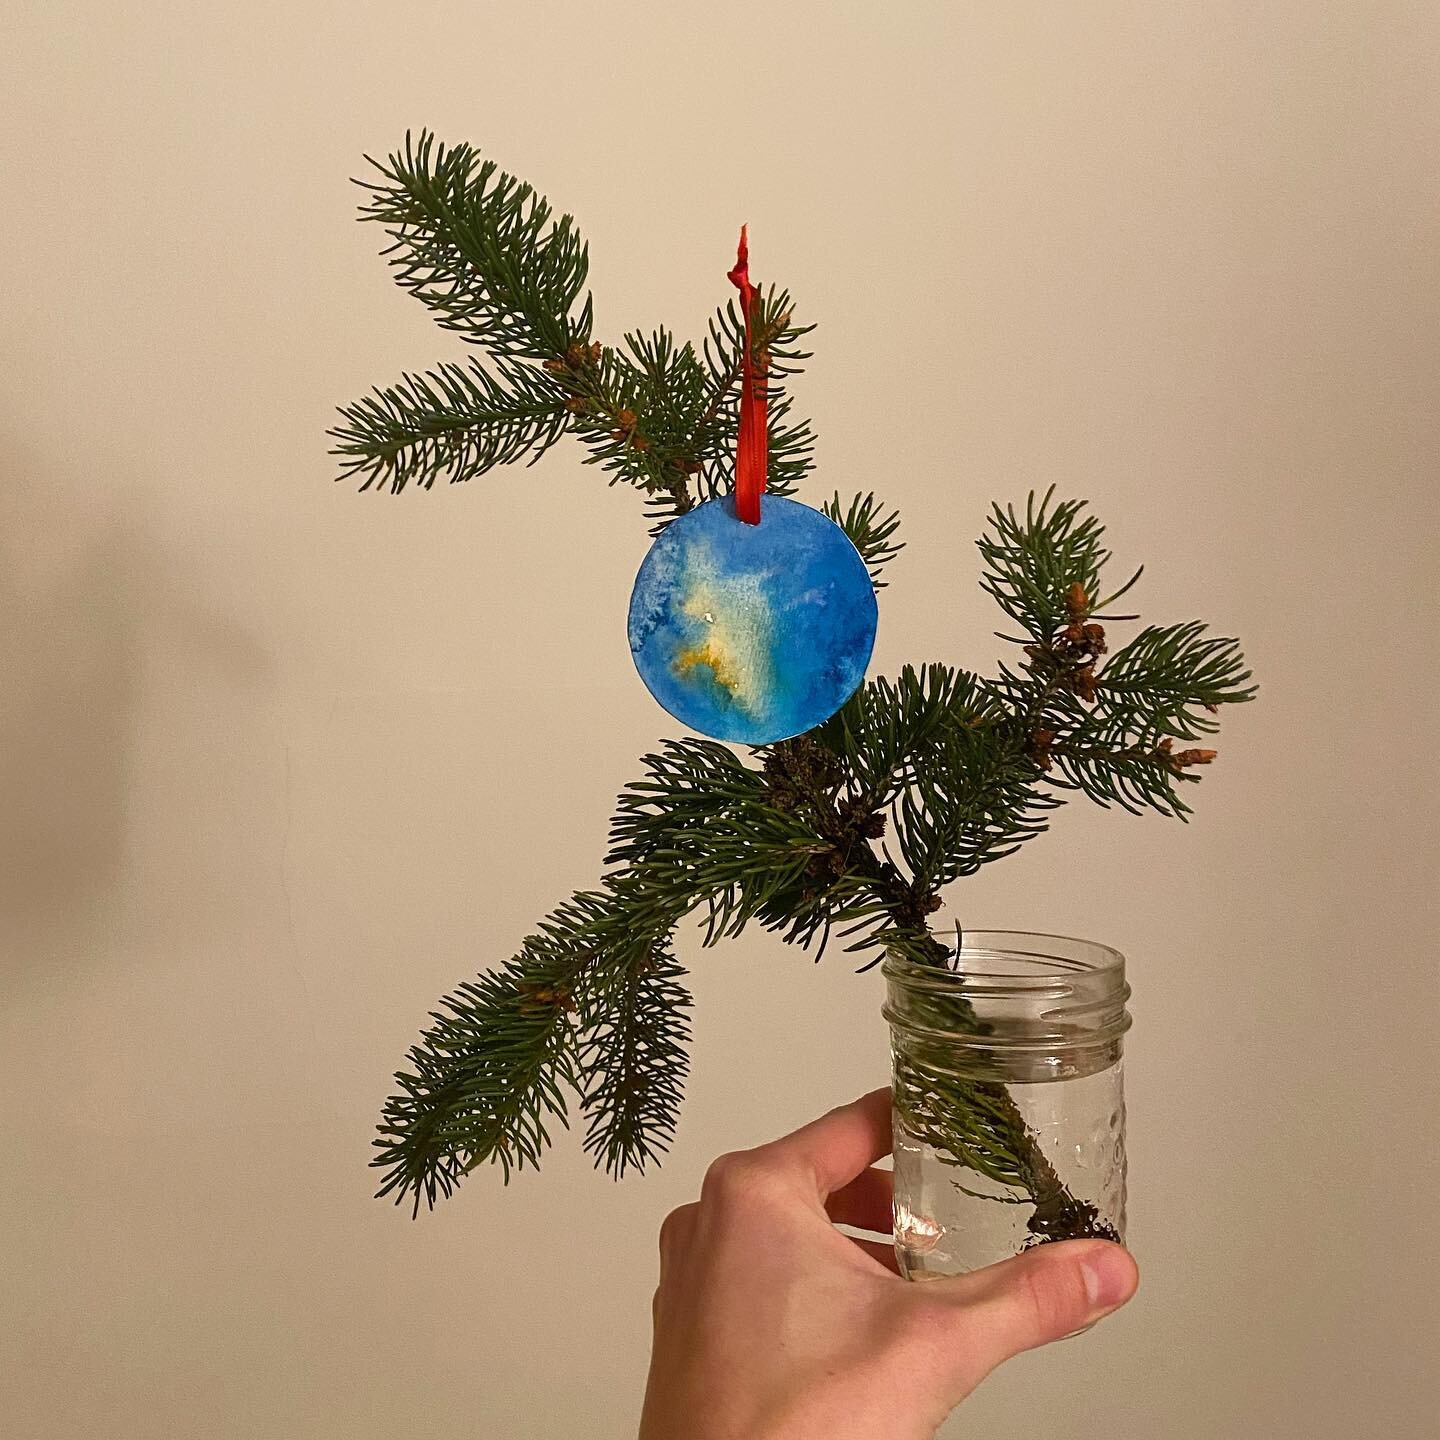 Eco-conscious Christmas tree! 🎄Featuring a pine branch we found on the ground and watercolor ornament #charliebrownchristmastree #ecochristmas #pine #dorchesterontario